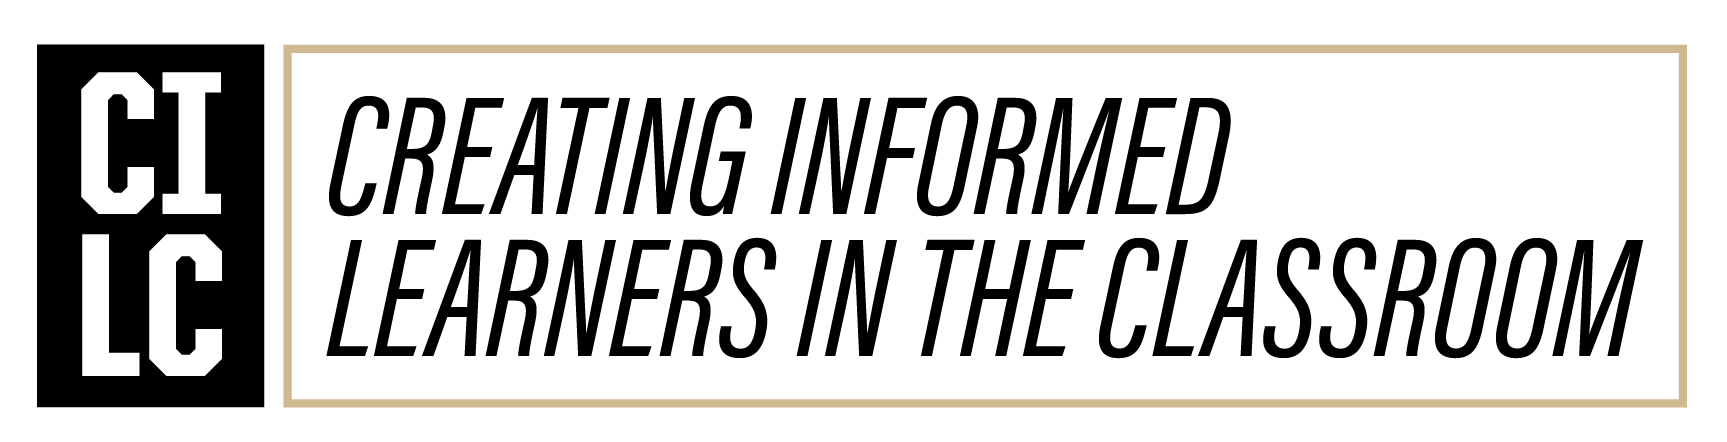 Creating Informed Learners in the Classroom logo